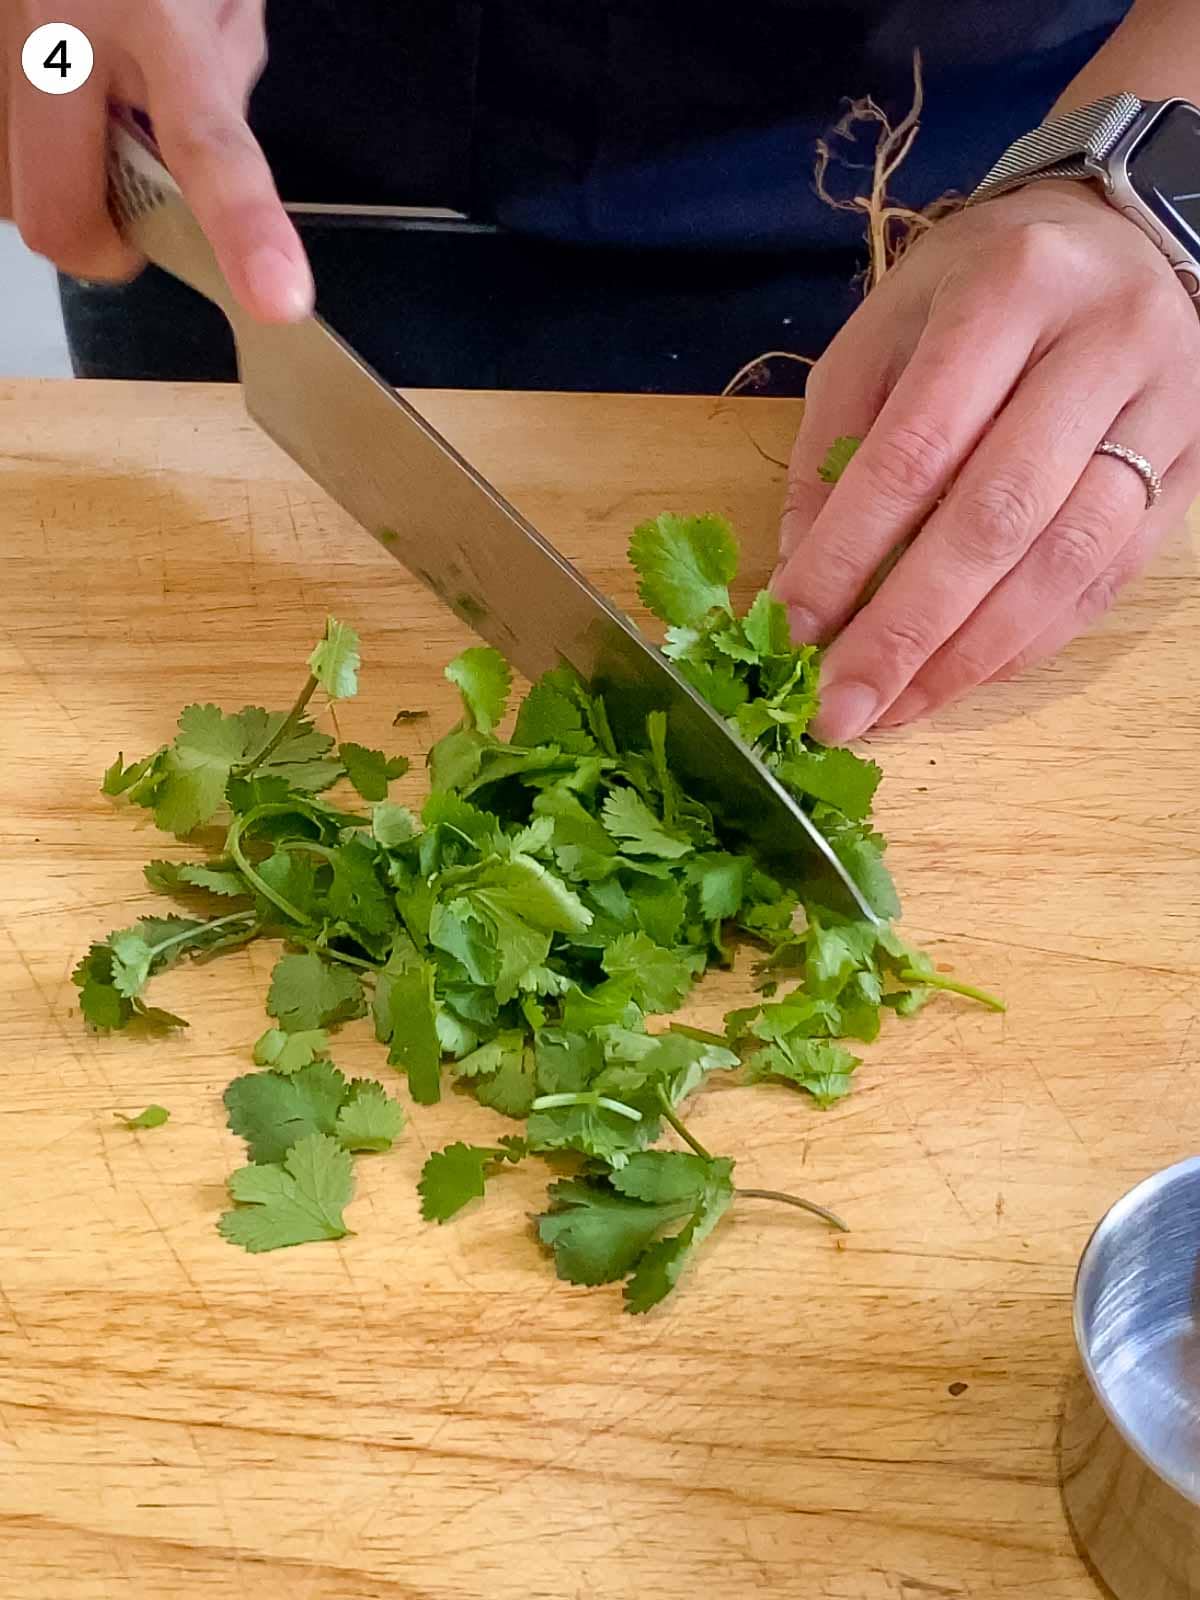 Person in an apron chopping coriander leaves